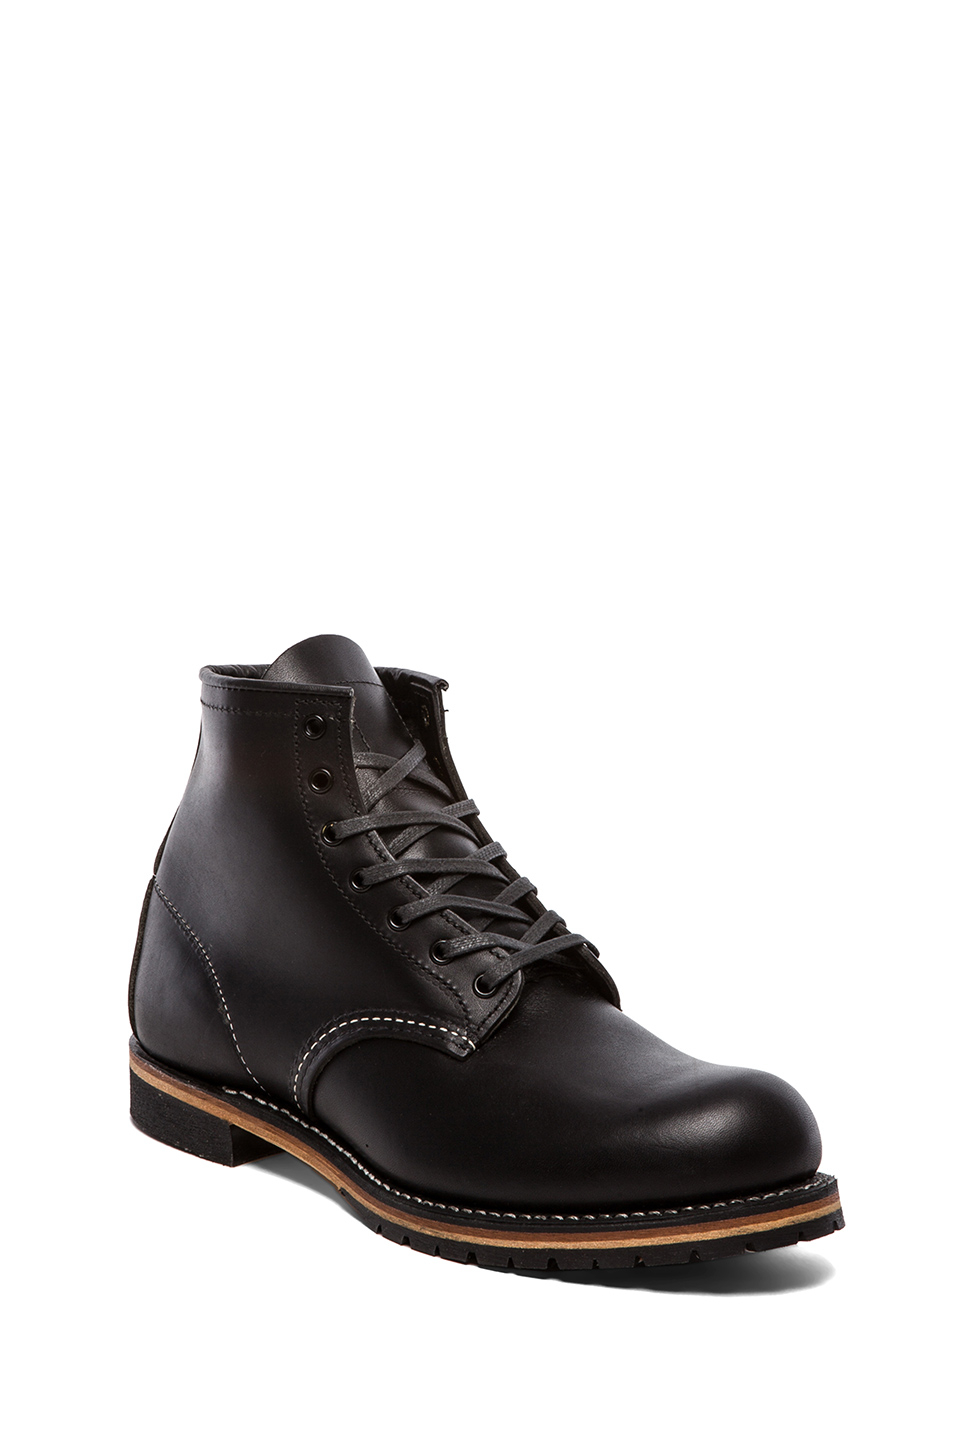 Red wing Beckman 6